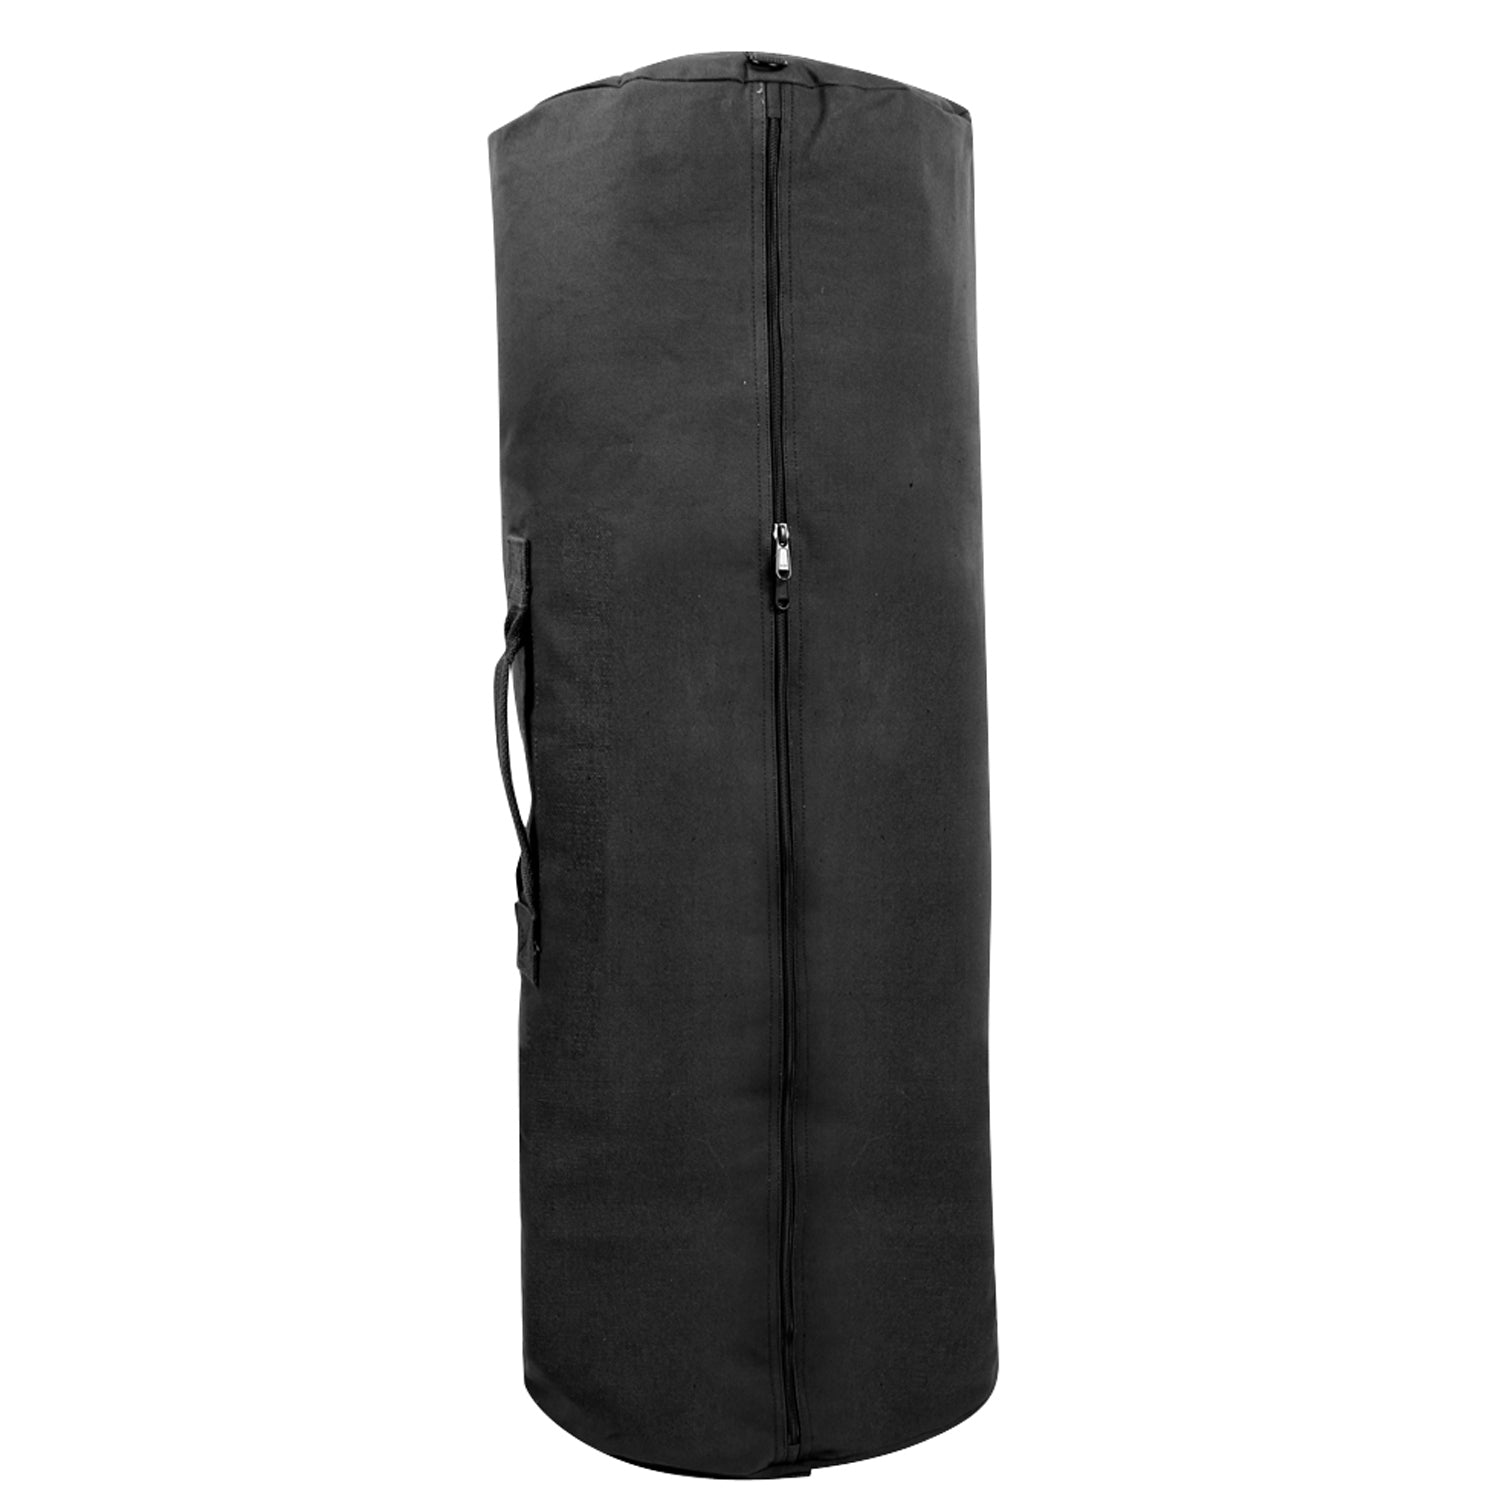 Canvas Duffle Bag with Side Zipper - Tactical Choice Plus